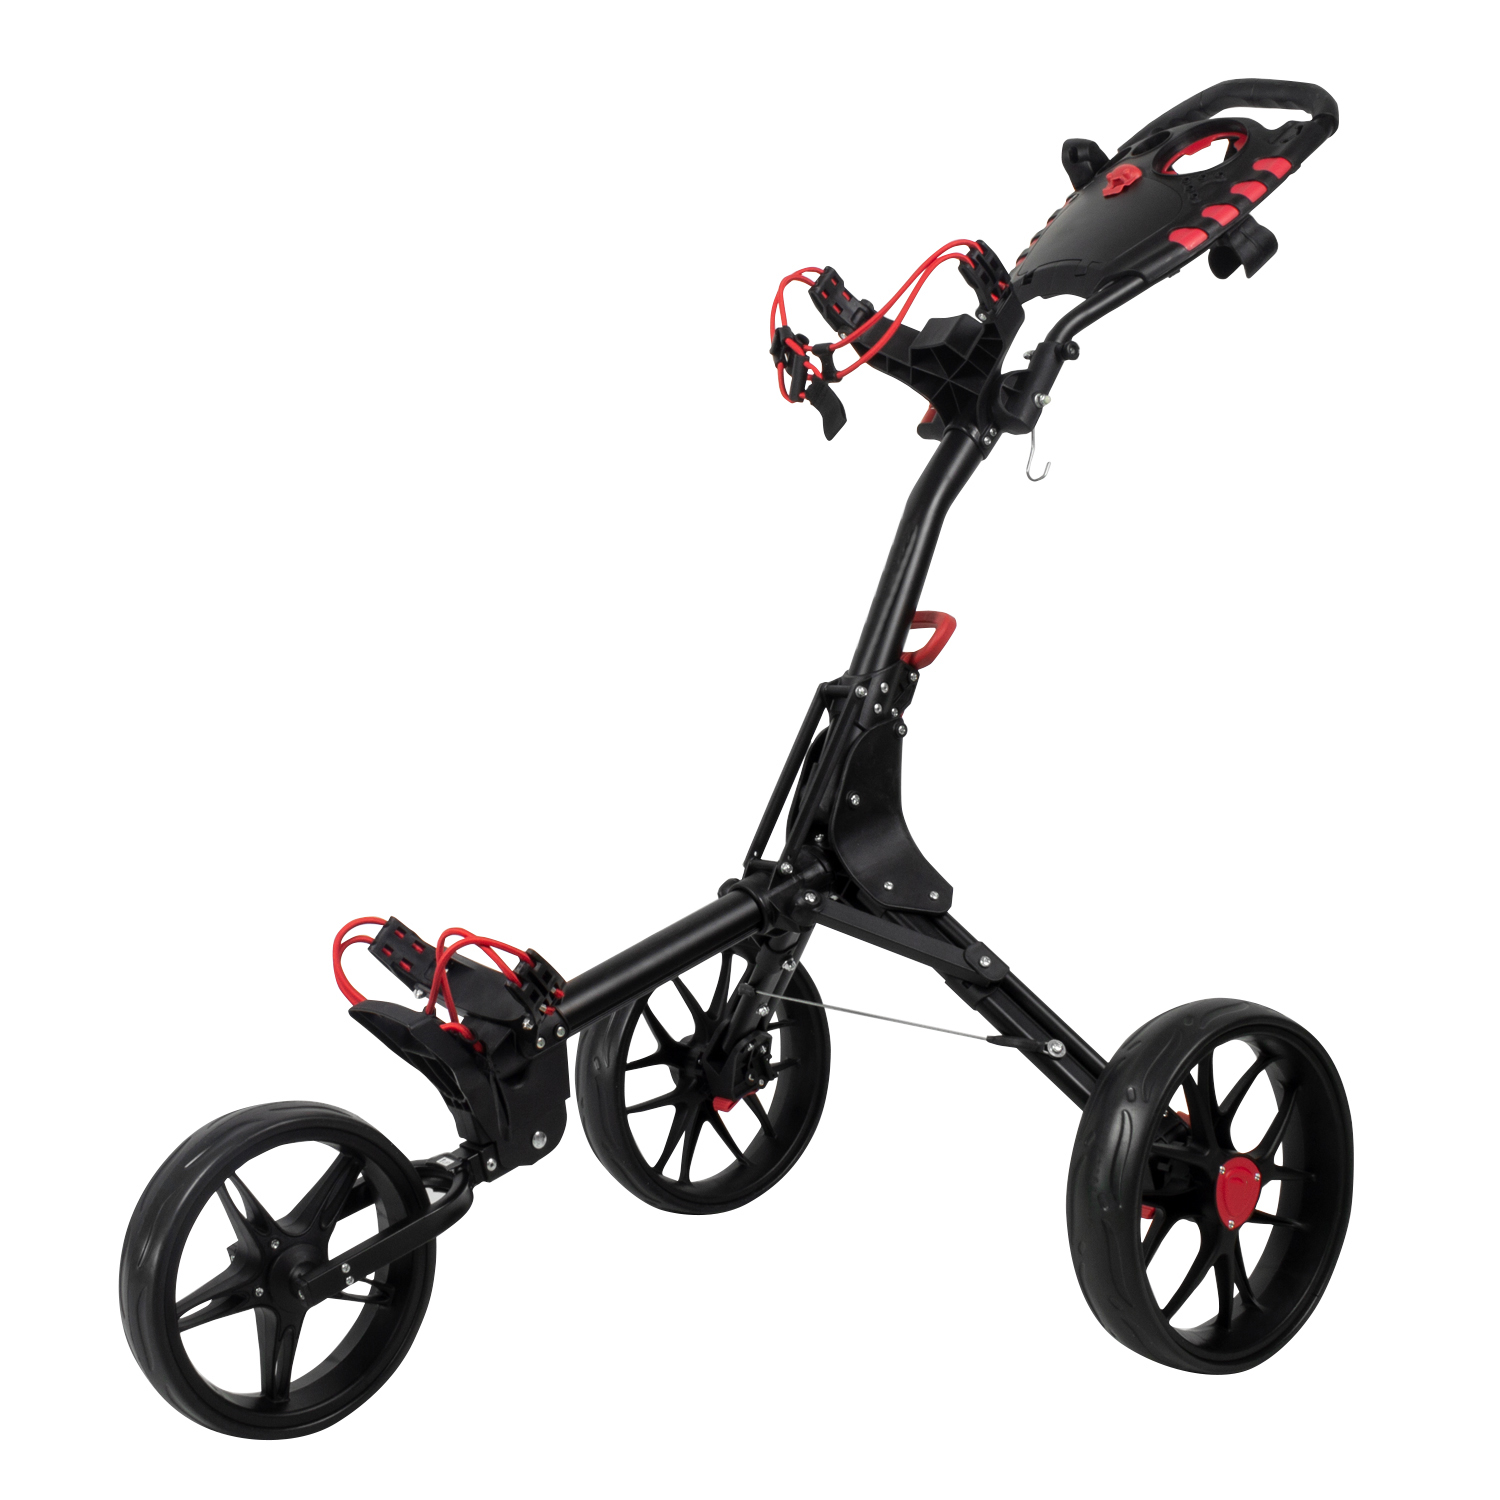 Compact push trolley with competitor folding size-Boyel Living